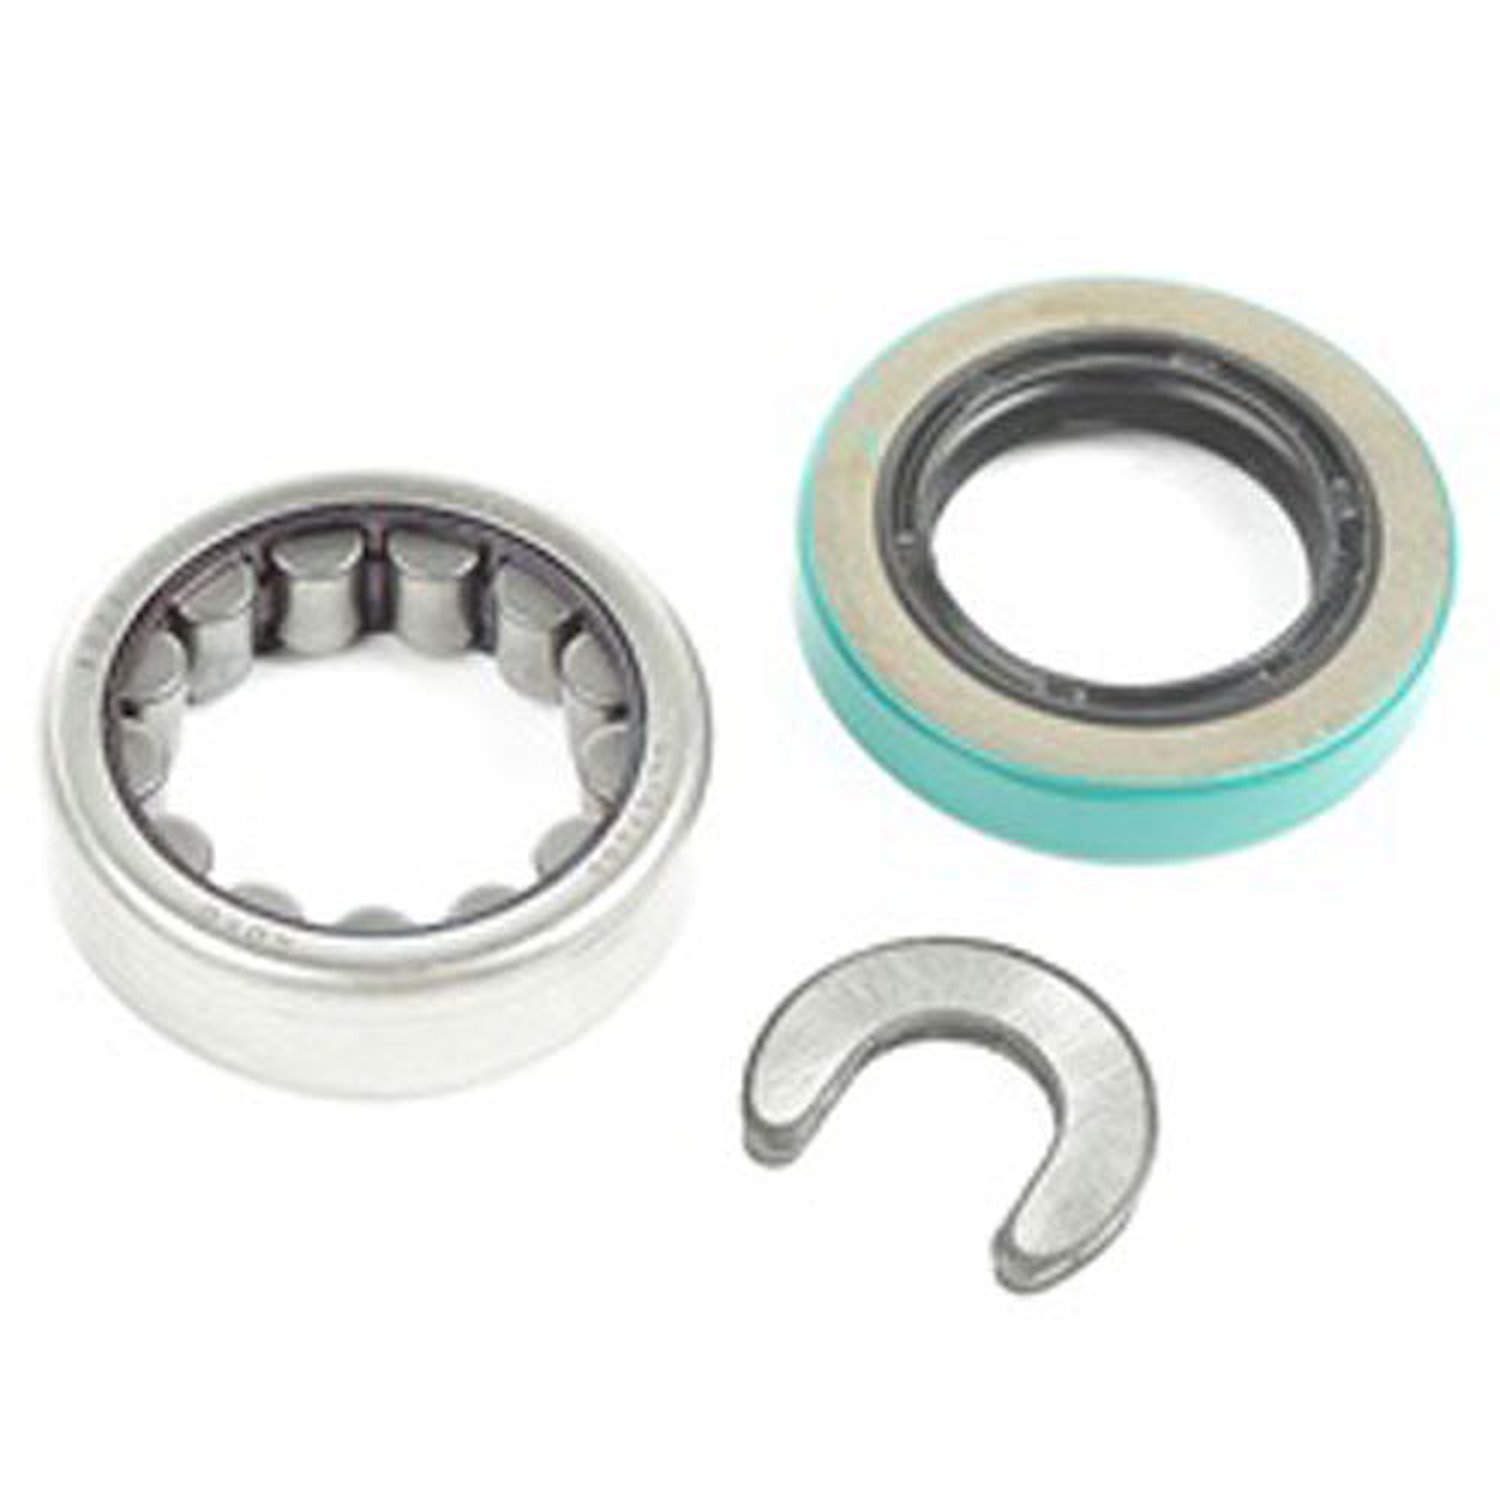 This bearing & seal kit from Omix-ADA fits